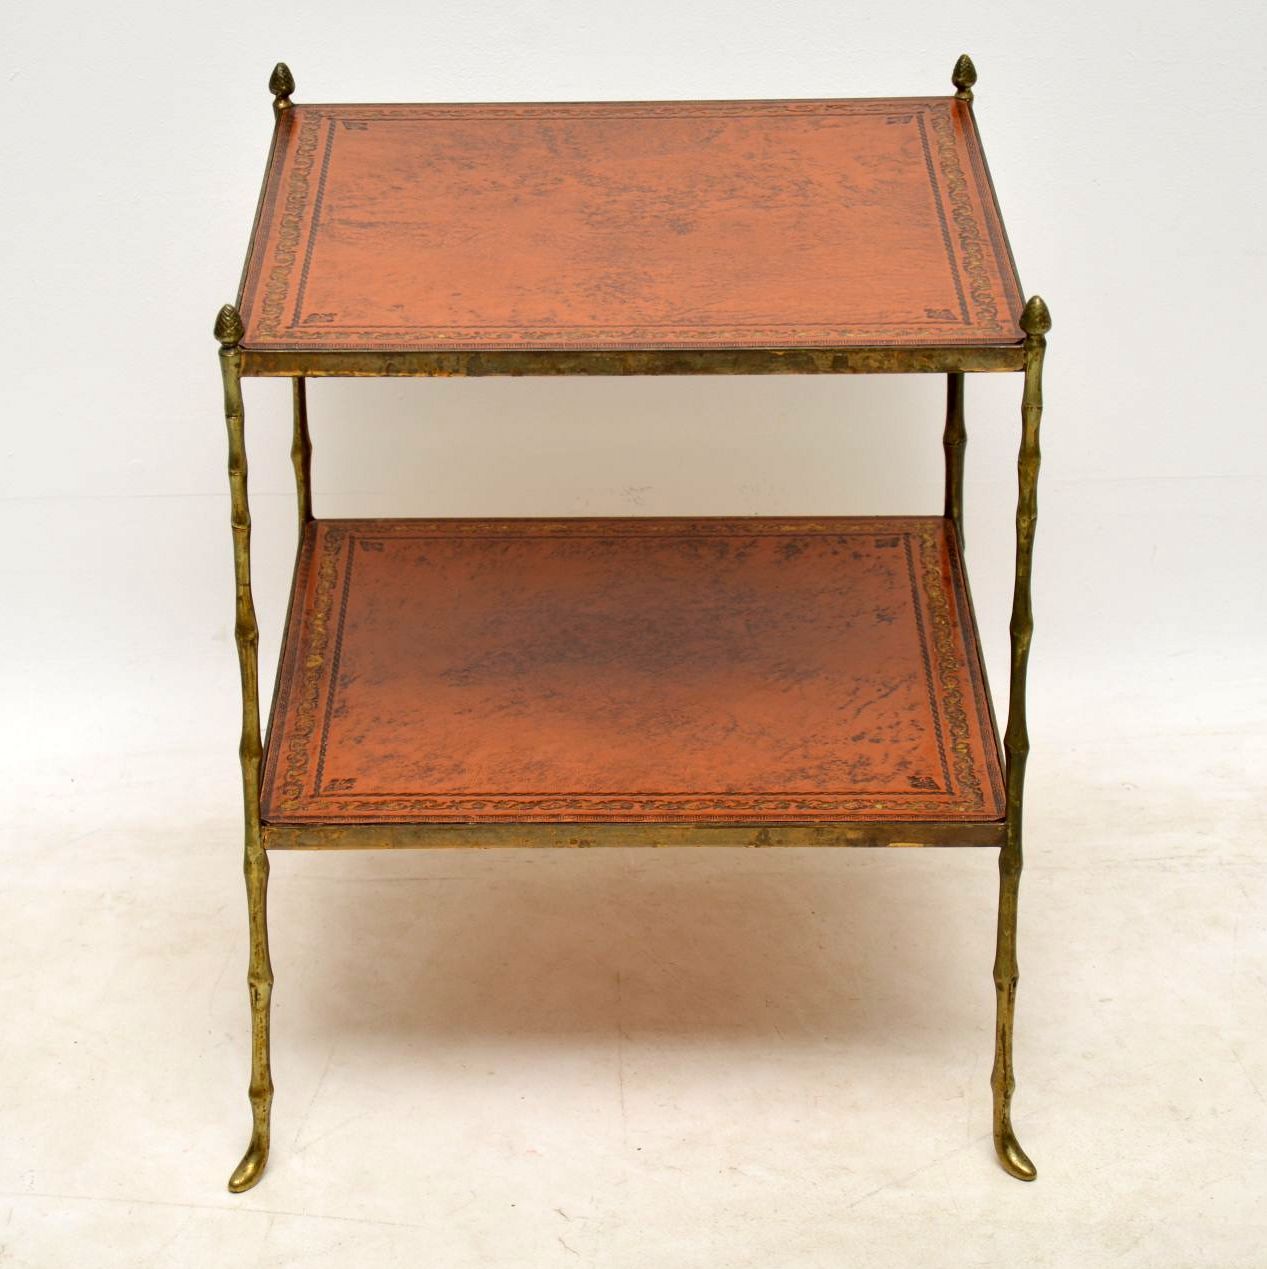 Antique Brass & Leather Coffee Table / Side Table | Interior Boutiques Regarding Espresso Antique Brass Stools (View 20 of 20)